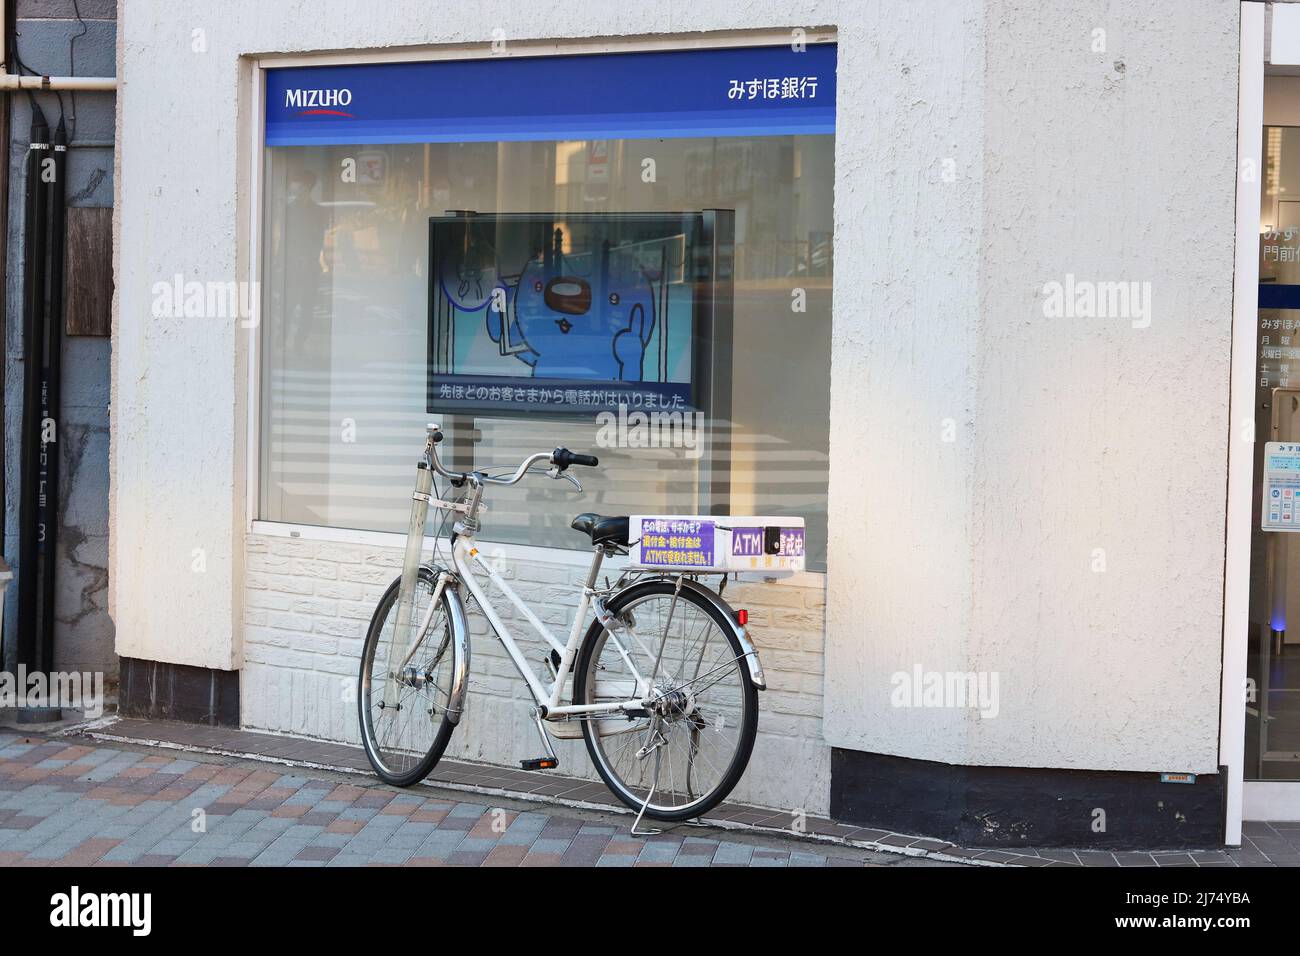 TOKYO, JAPAN - May 3, 2022: Mizuho Bank ATM facility with a police bicycle outside warning people about telephone scammers. It's in Tokyo's Koto Ward. Stock Photo